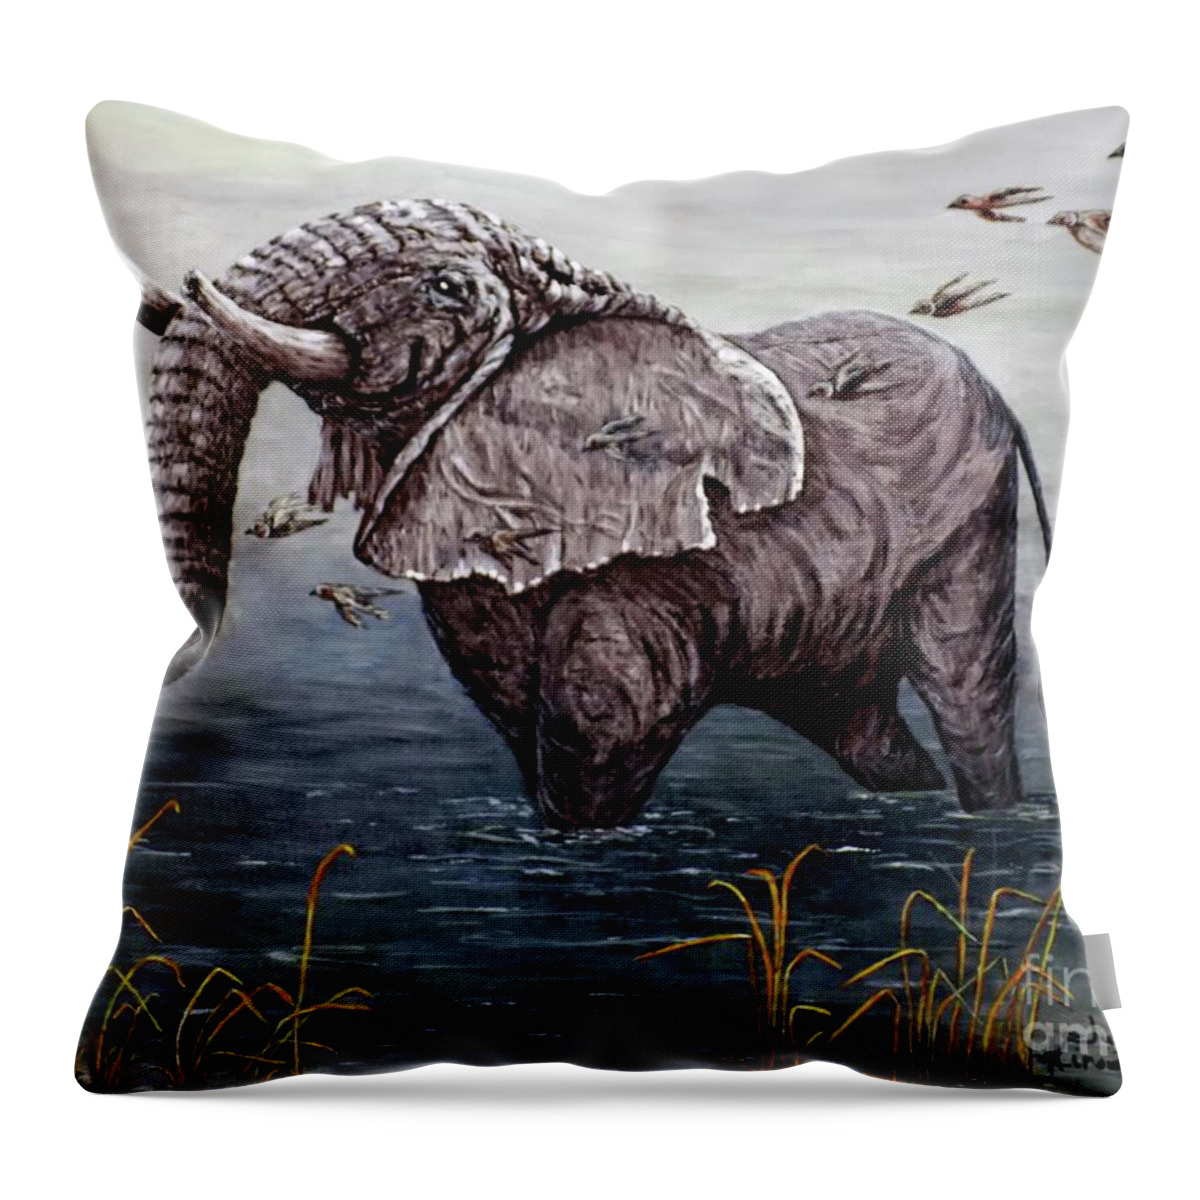 Old Elephant Throw Pillow featuring the painting Old Elephant by Judy Kirouac